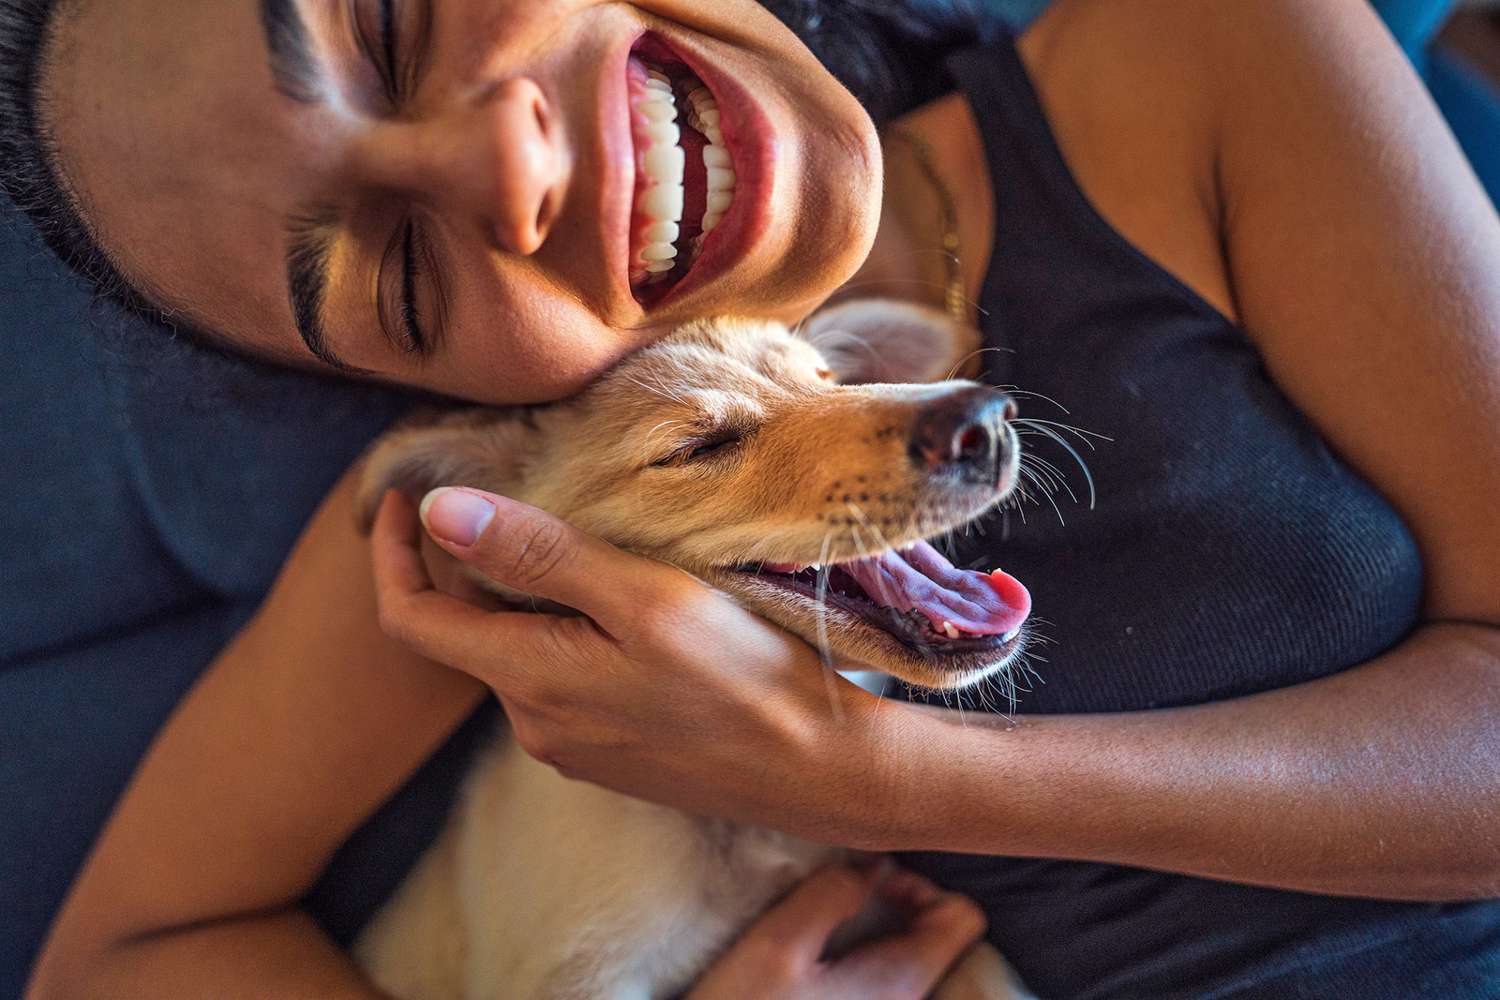 How to Bond With Your Dog In 9 Easy, Expert-Approved Ways | Daily Paws